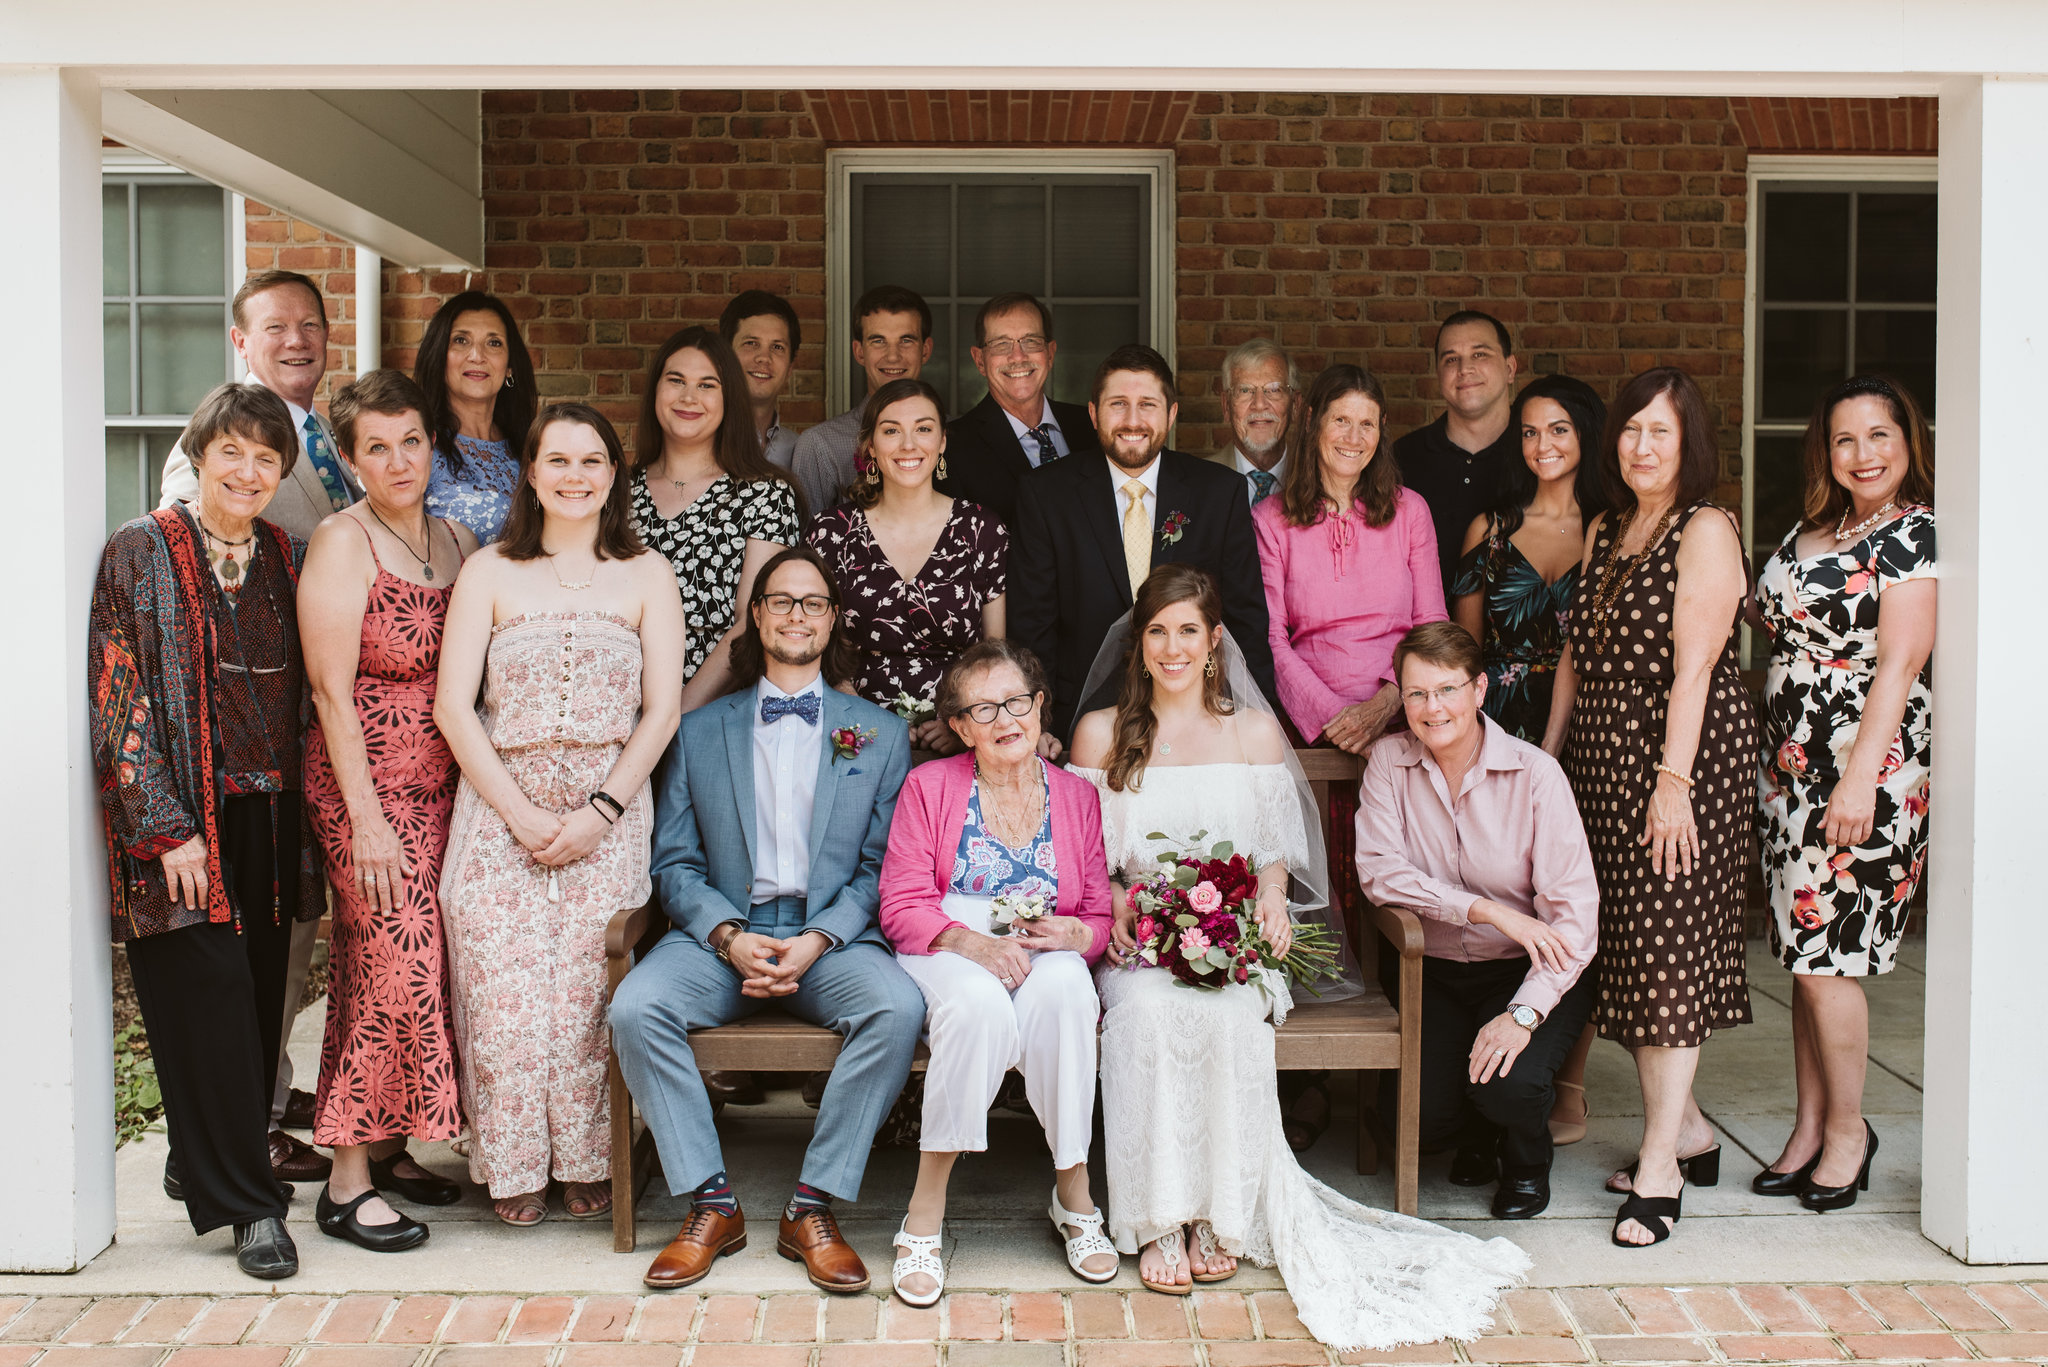  Annapolis, Quaker Wedding, Maryland Wedding Photographer, Intimate, Small Wedding, Vintage, DIY, Portrait of Entire Family, Bride and Groom with Family 